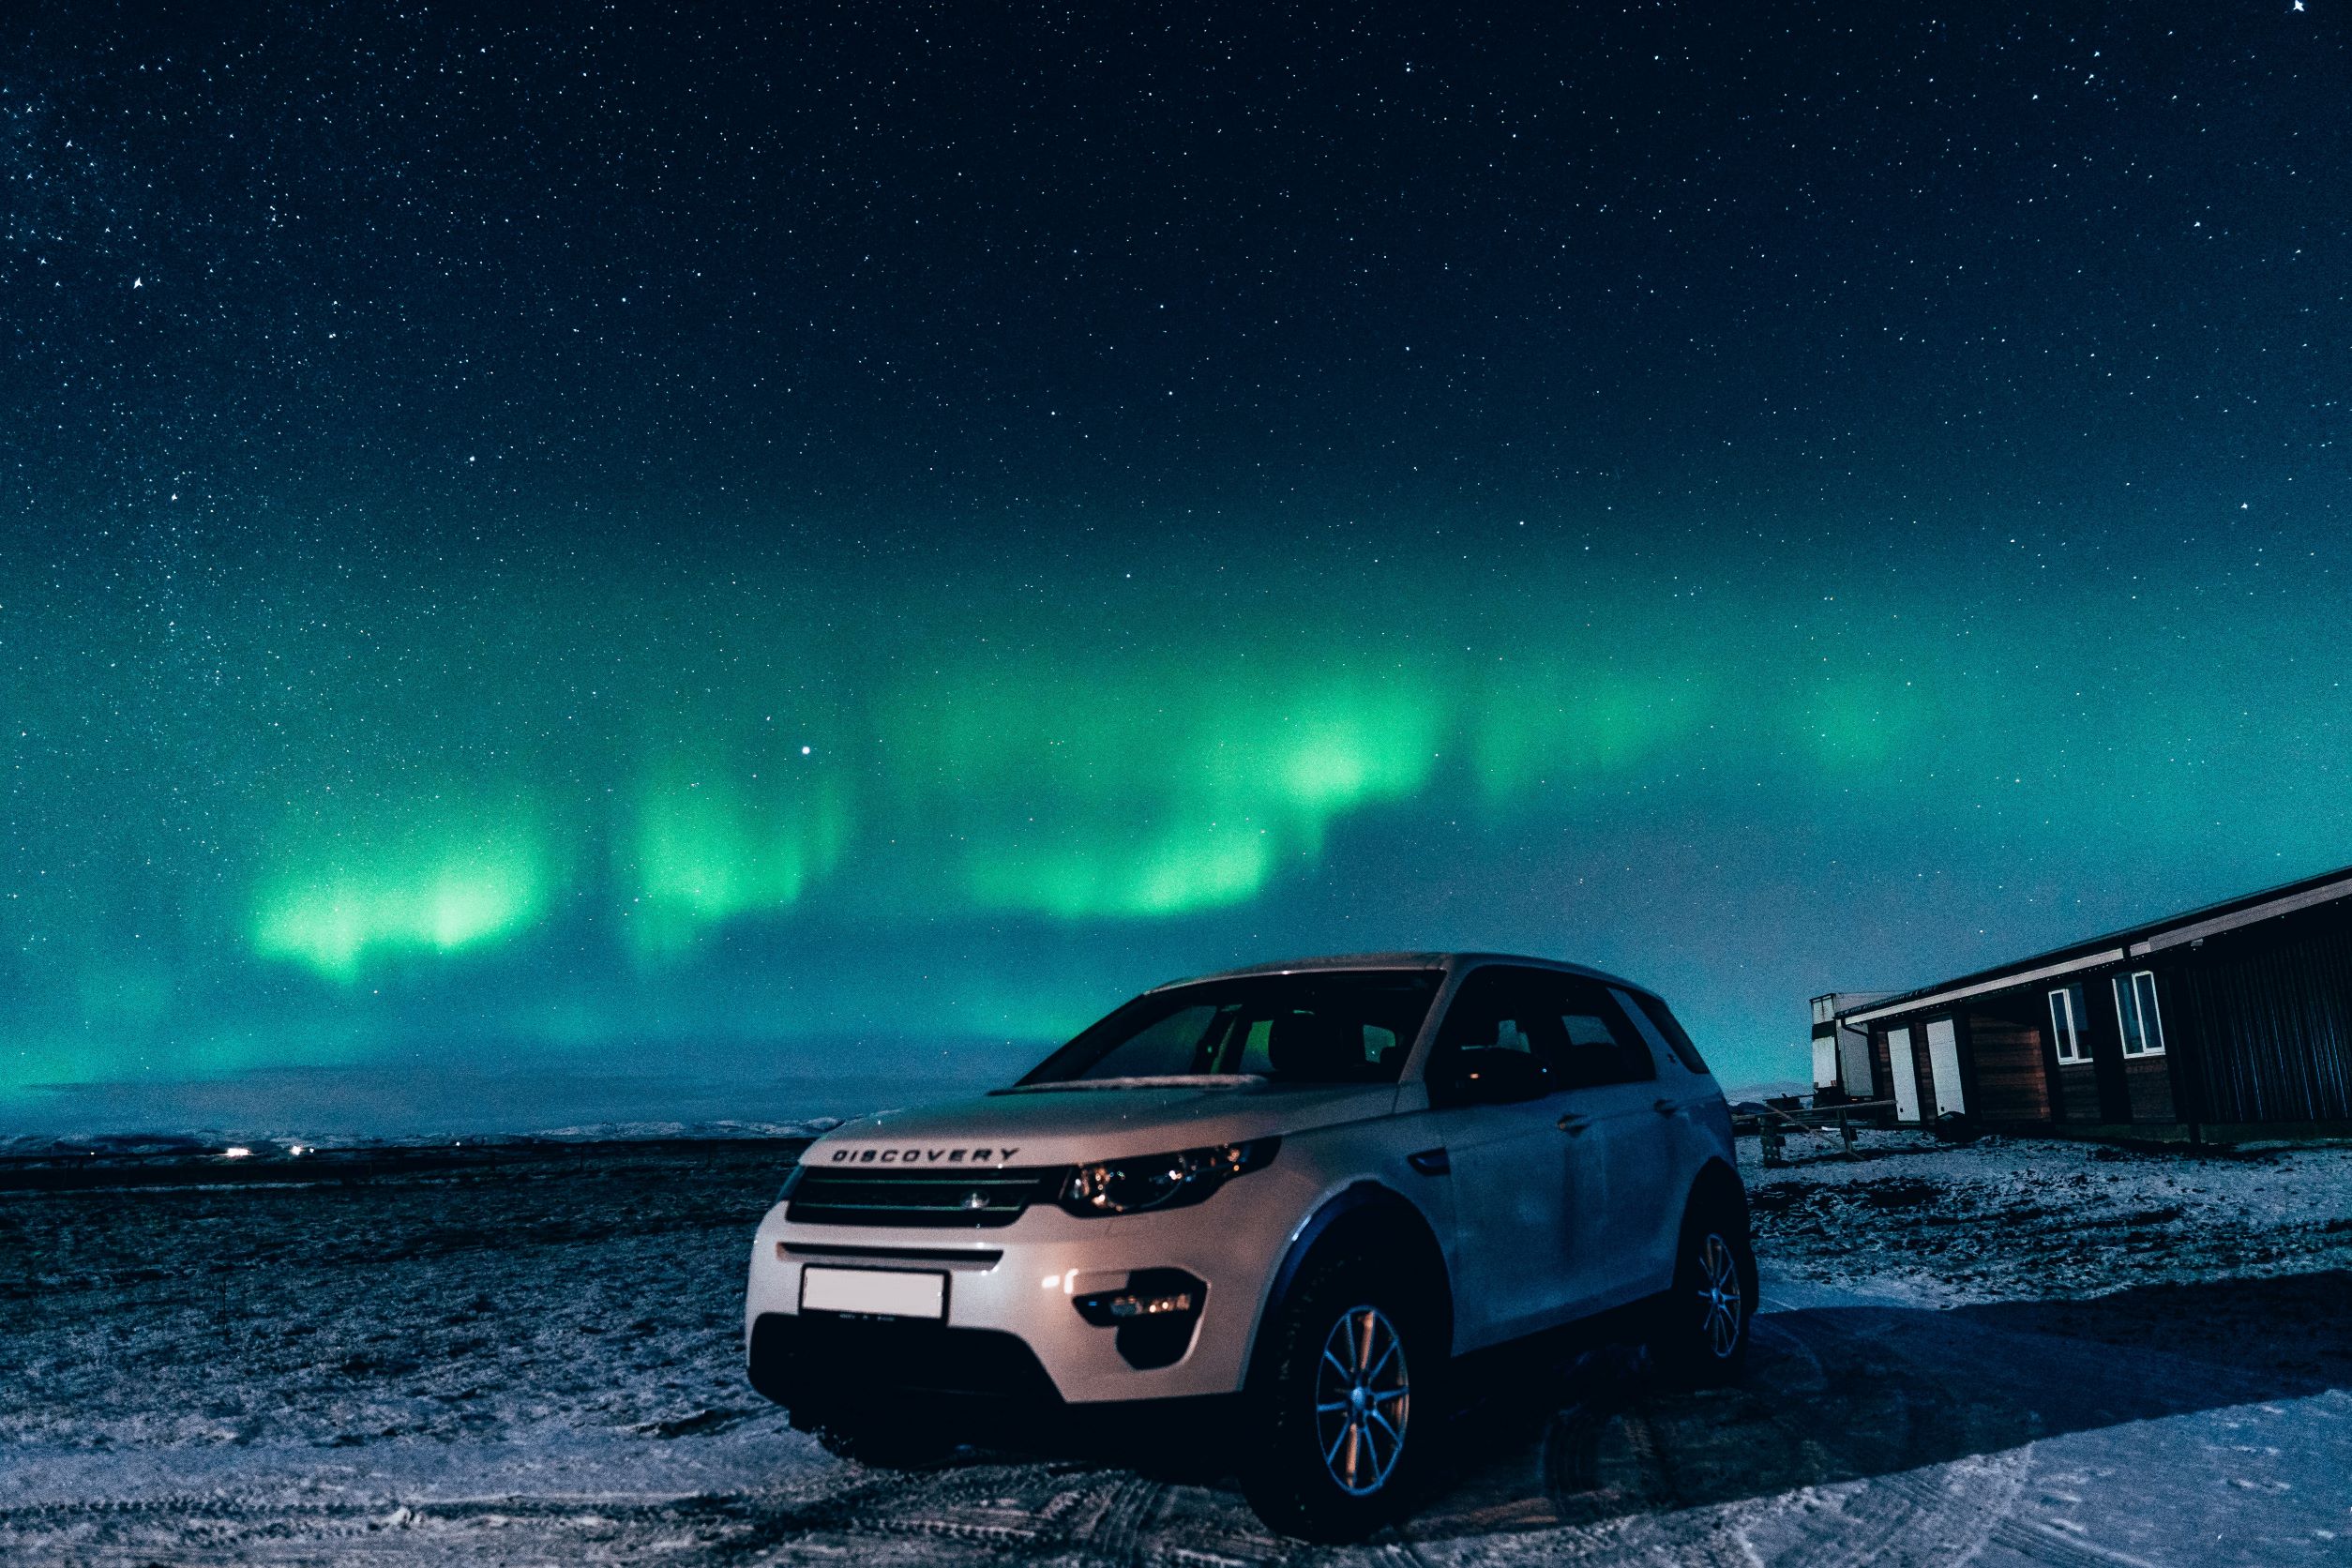 A Land Rover Discovery parked on a snowy terrain at night, with the aurora borealis visible in the starry sky above, next to a dark structure that resembles a house or shed.